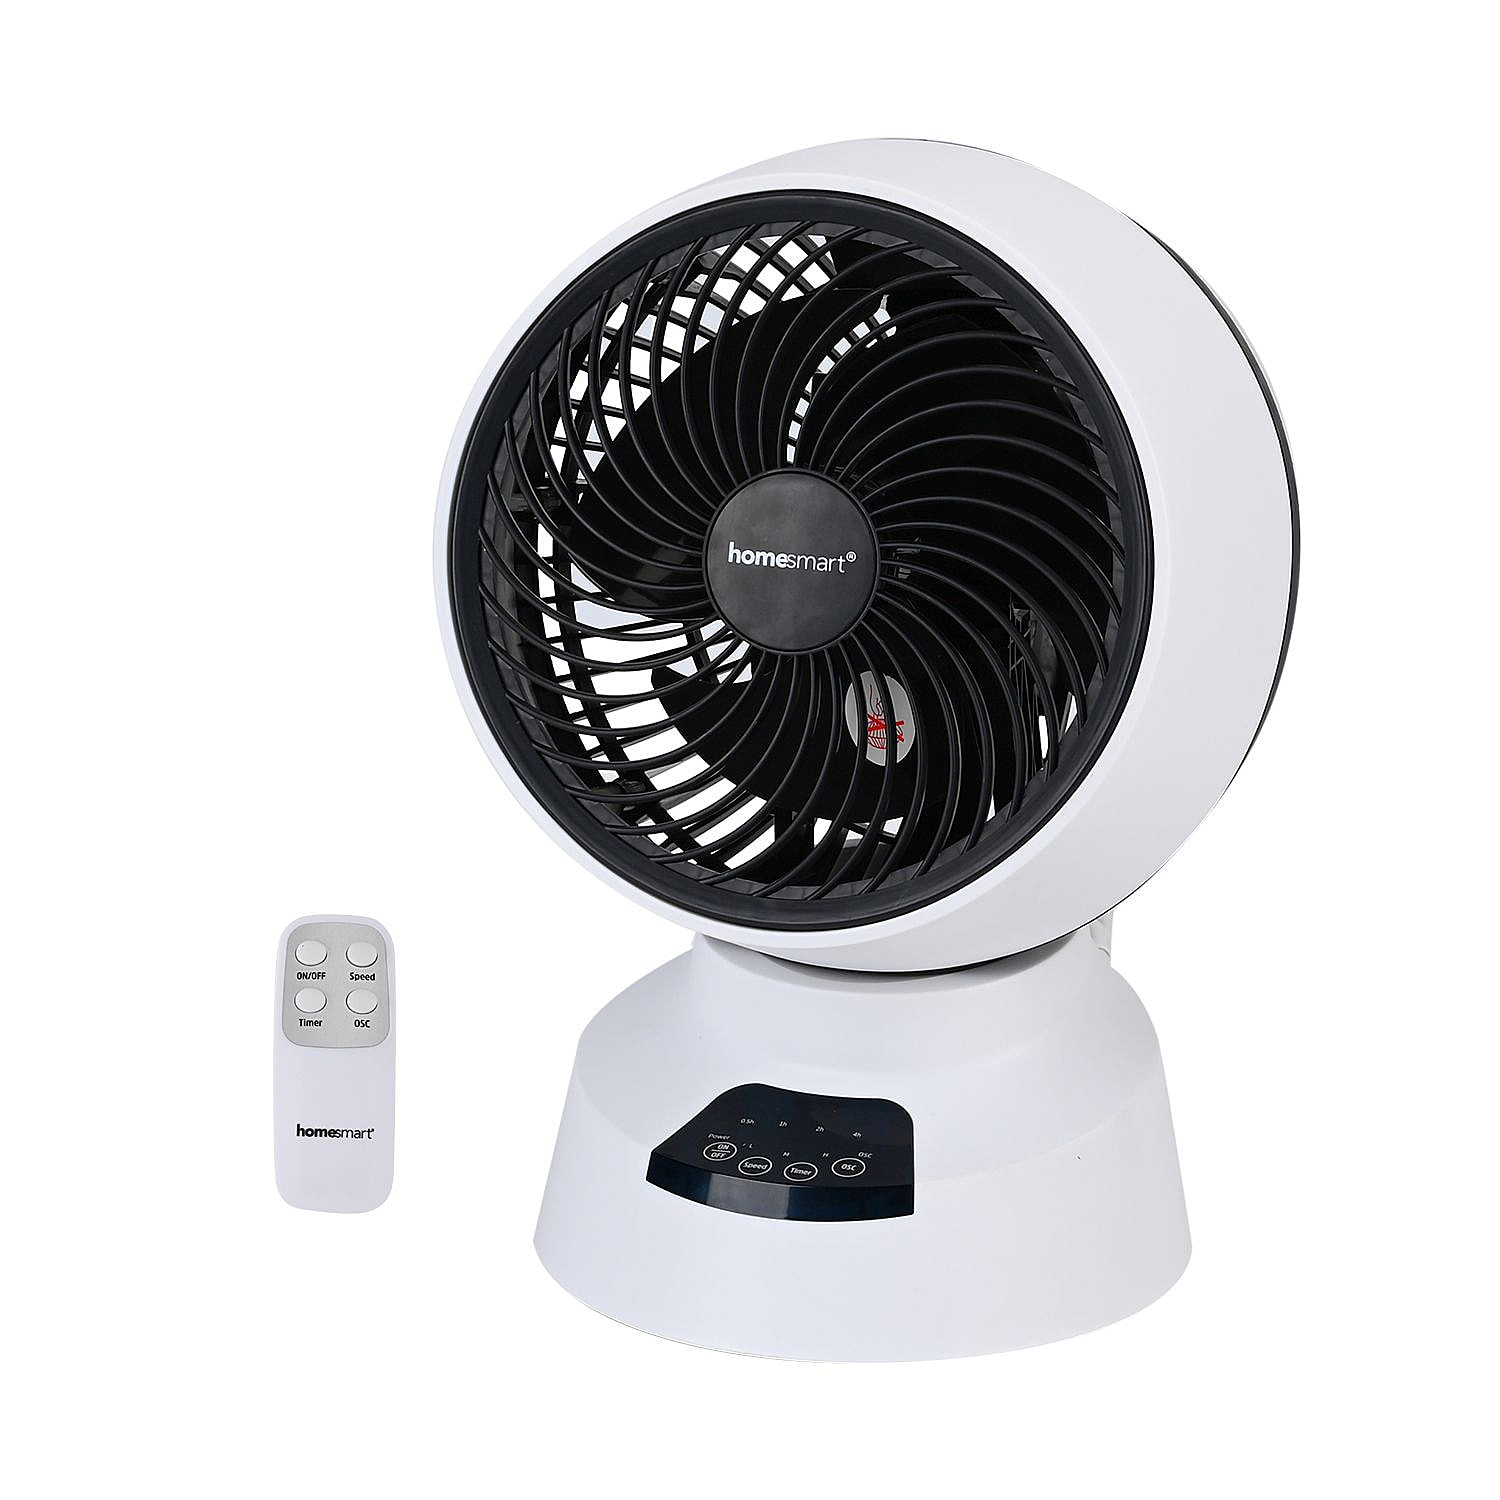 Homesmart Digital Fan With 3 speed Auto Horizantal and Vertical Oscillation (7.5 hours Timer)